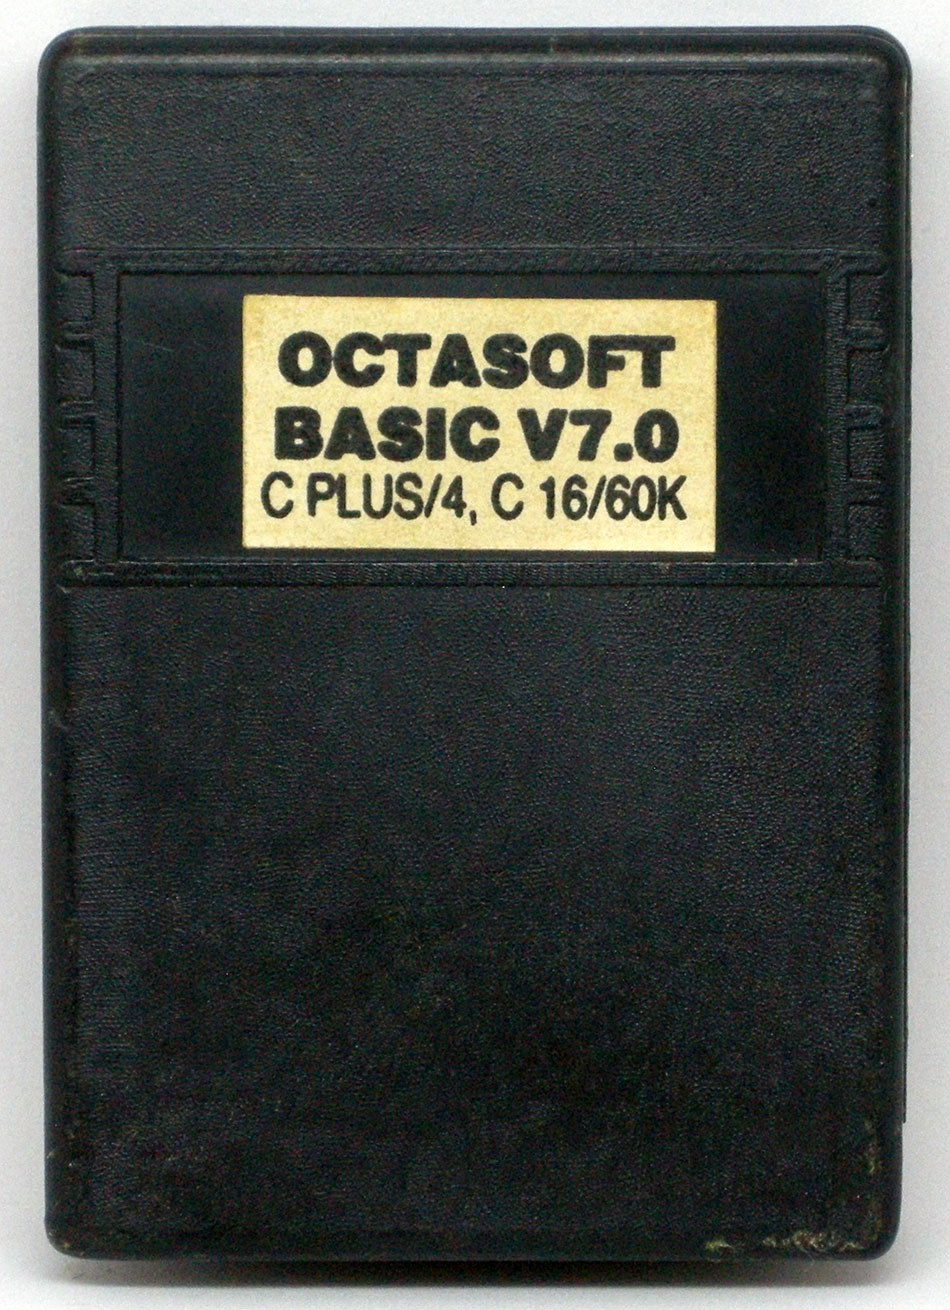 Cartridge (Front)
Submitted by Lacus